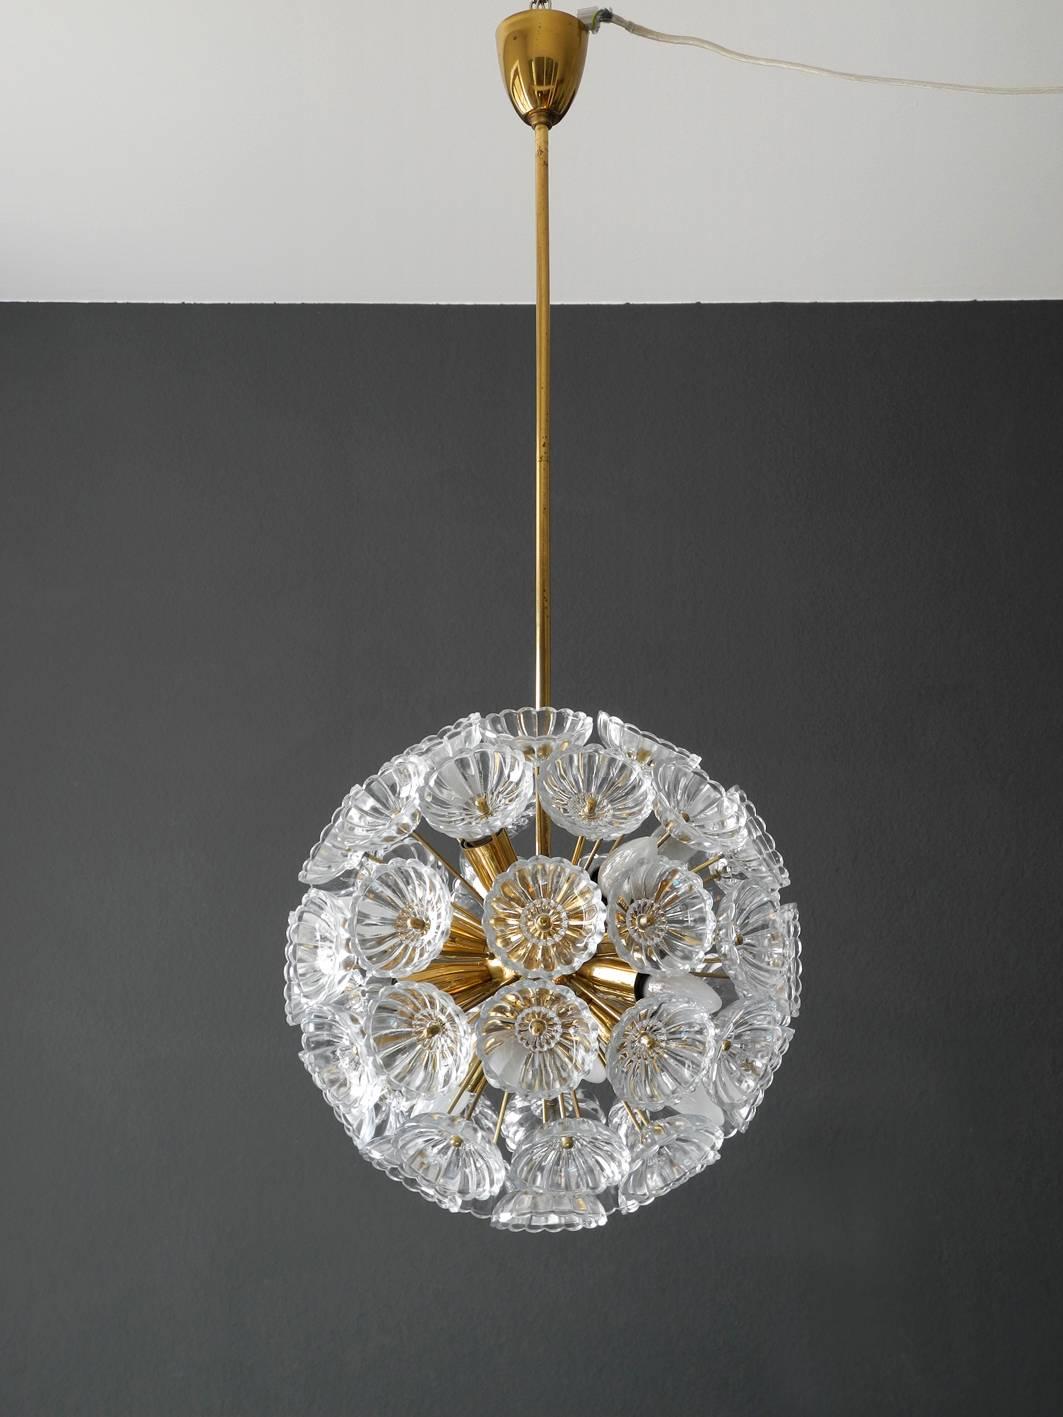 Very rare 1960s Pop Art Space Age Sputnik brass glass flower ceiling lamp.
Beautiful design for a great light experience.
Very good vintage condition without damages. 
All glasses complete and without any damages.
Twelve E14 sockets. 100%